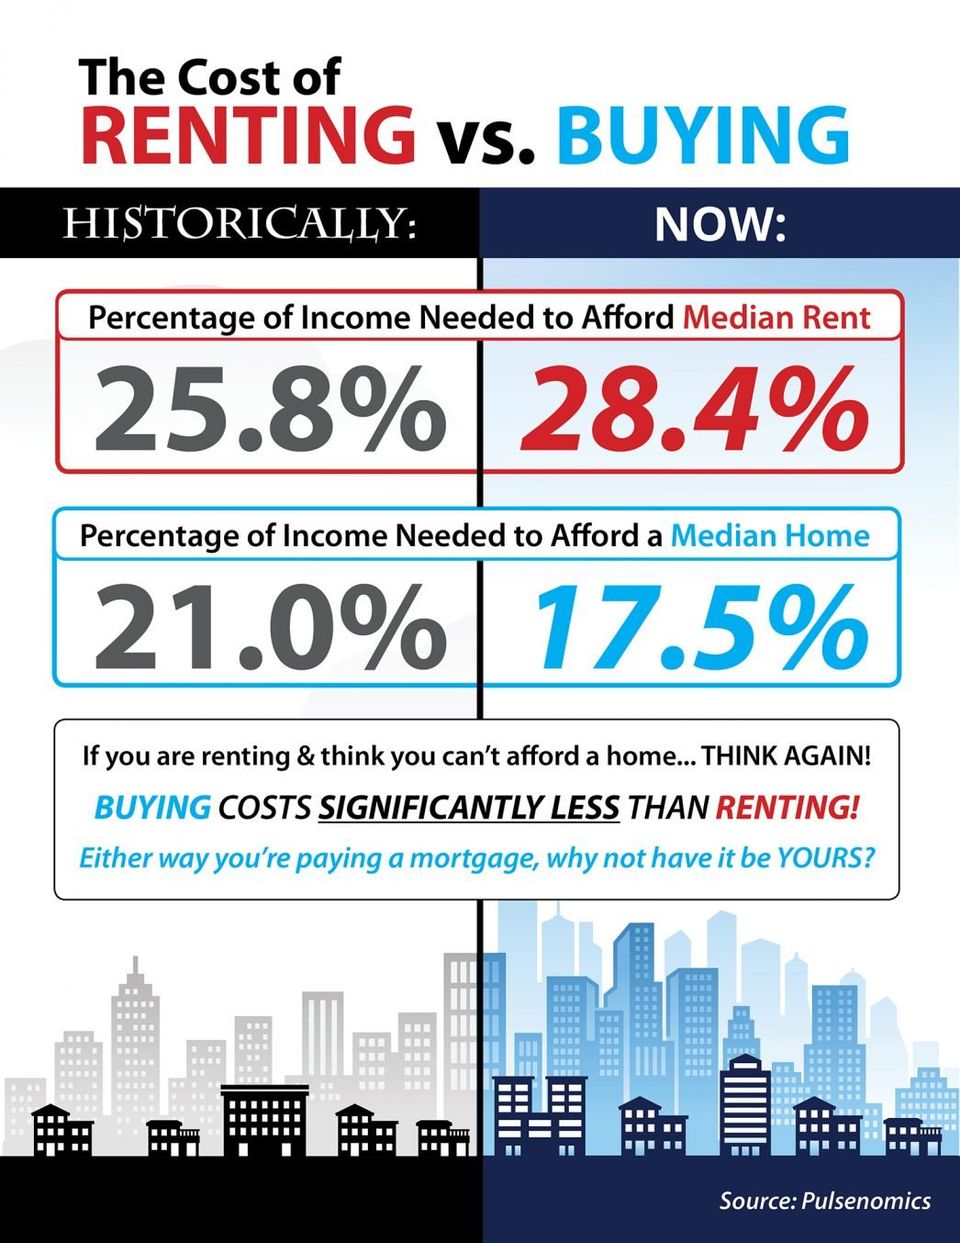 The cost of Renting Vs Buying 2018